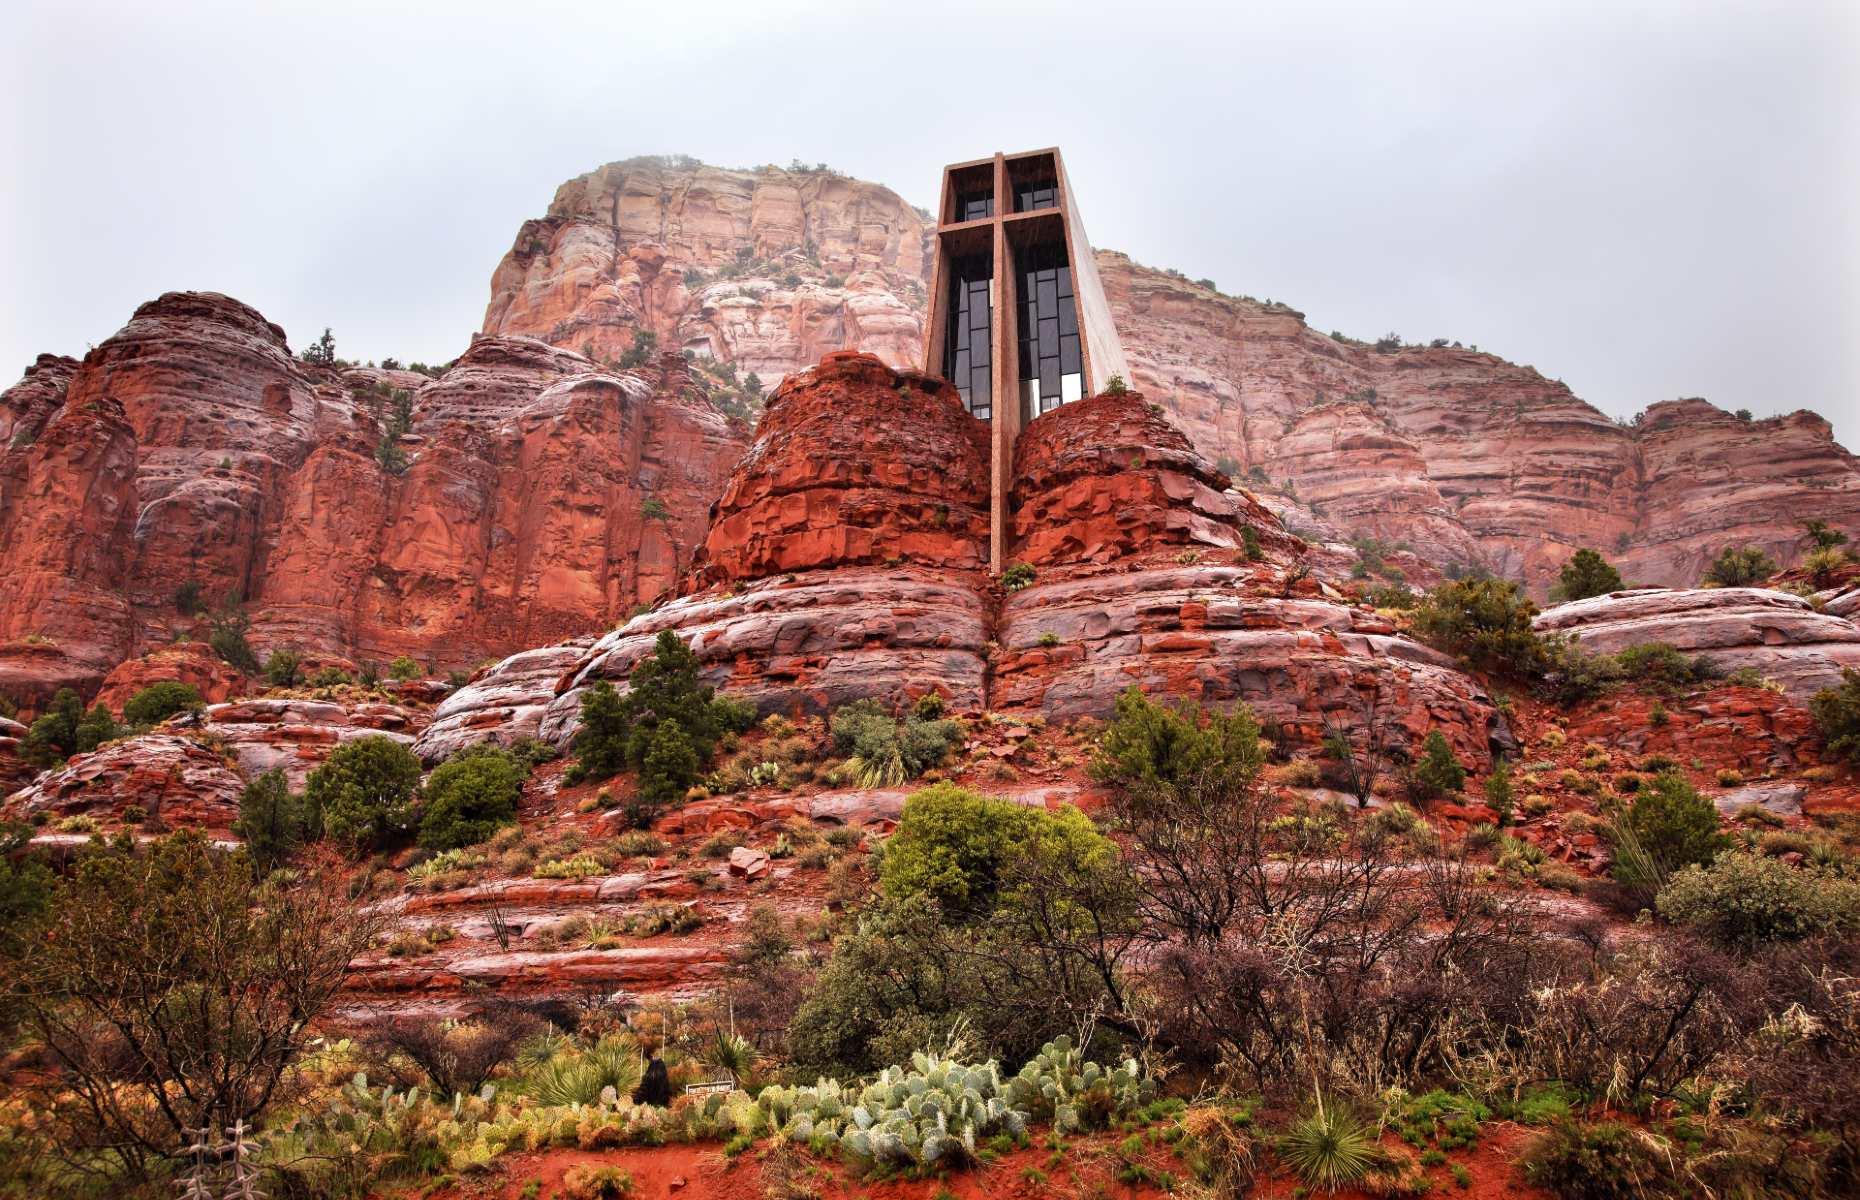 <p>Perched in the red rocks high above the town of Sedona, the Chapel of the Holy Cross is one of Arizona’s most unexpected sights. The ultra-modern looking structure was completed in 1956 and was the brainchild of local sculptor Marguerite Brunswig Staude, who took inspiration from the striking design of the Empire State Building. The main stained-glass window is held together by a giant cross and offers a spectacular view from inside, so it’s well worth popping in (the church is open from 9am to 5pm every day and can be visited for free). </p>